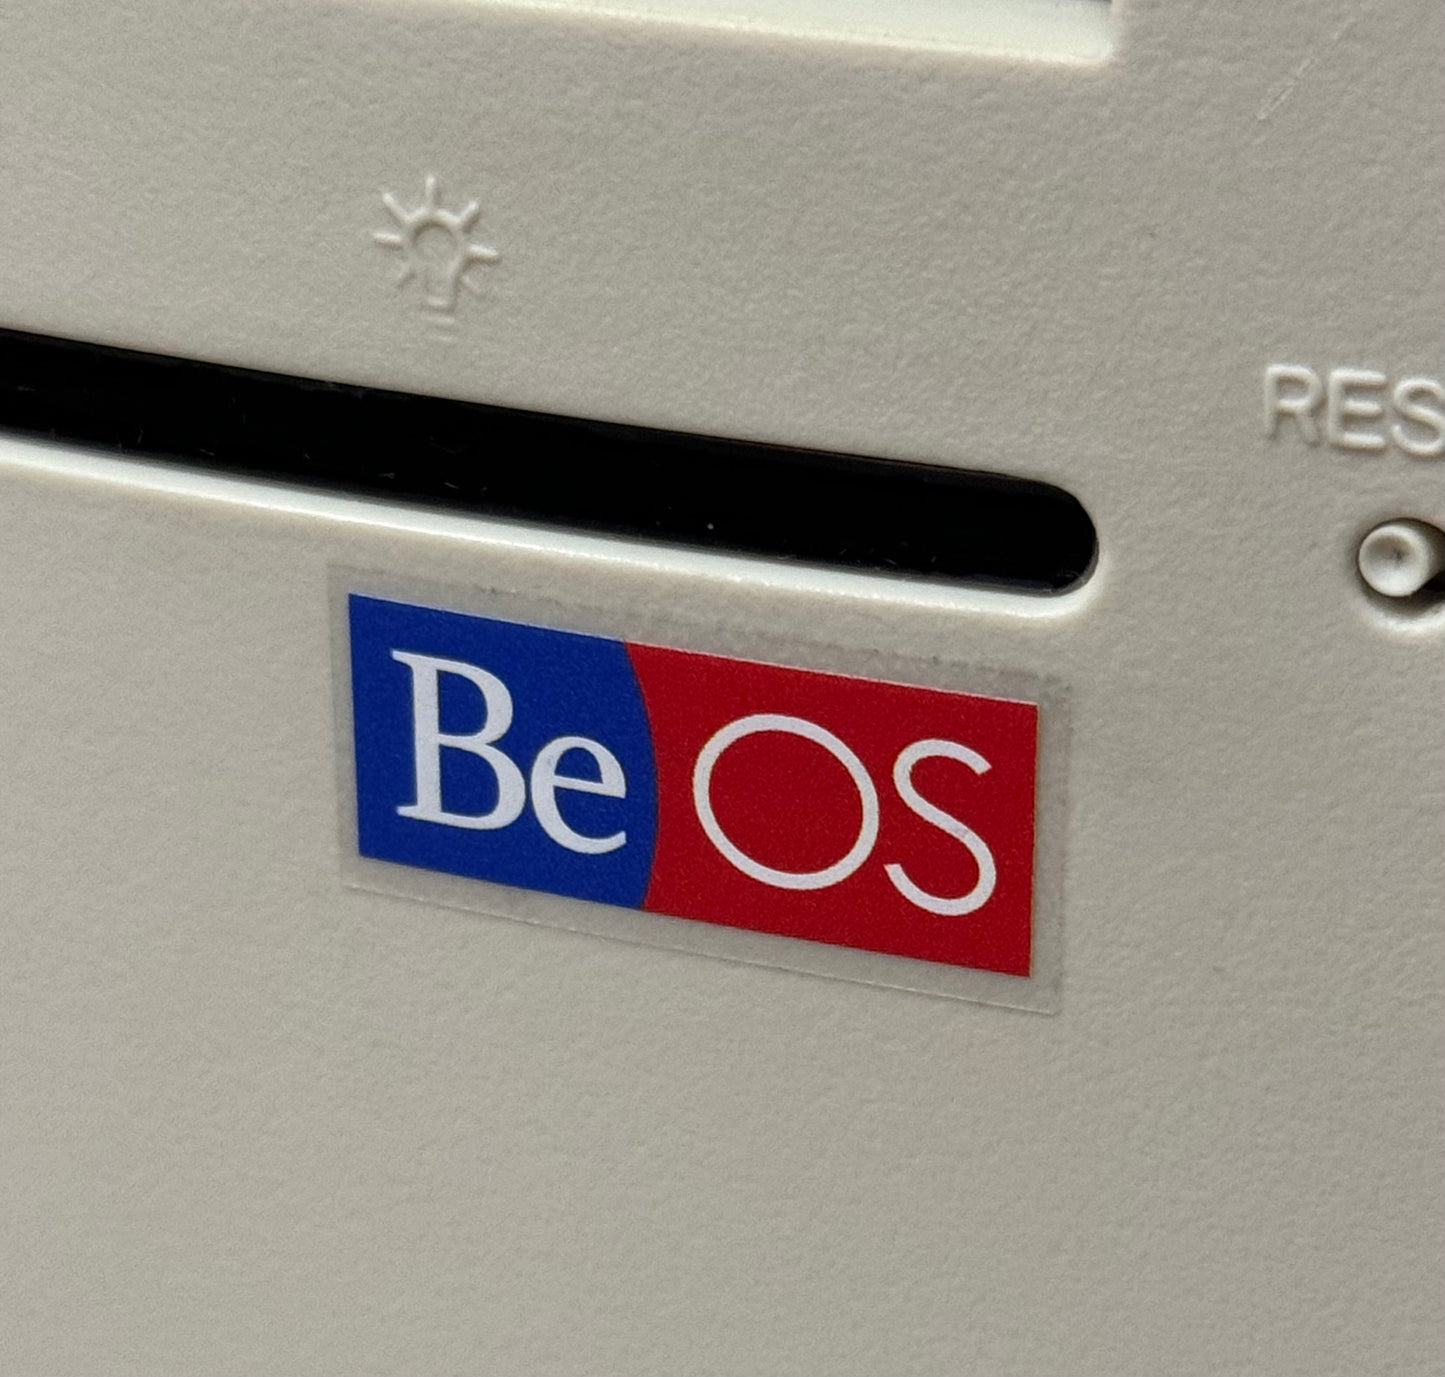 Be OS Beos Logo V2 Case Badge Sticker - Clear